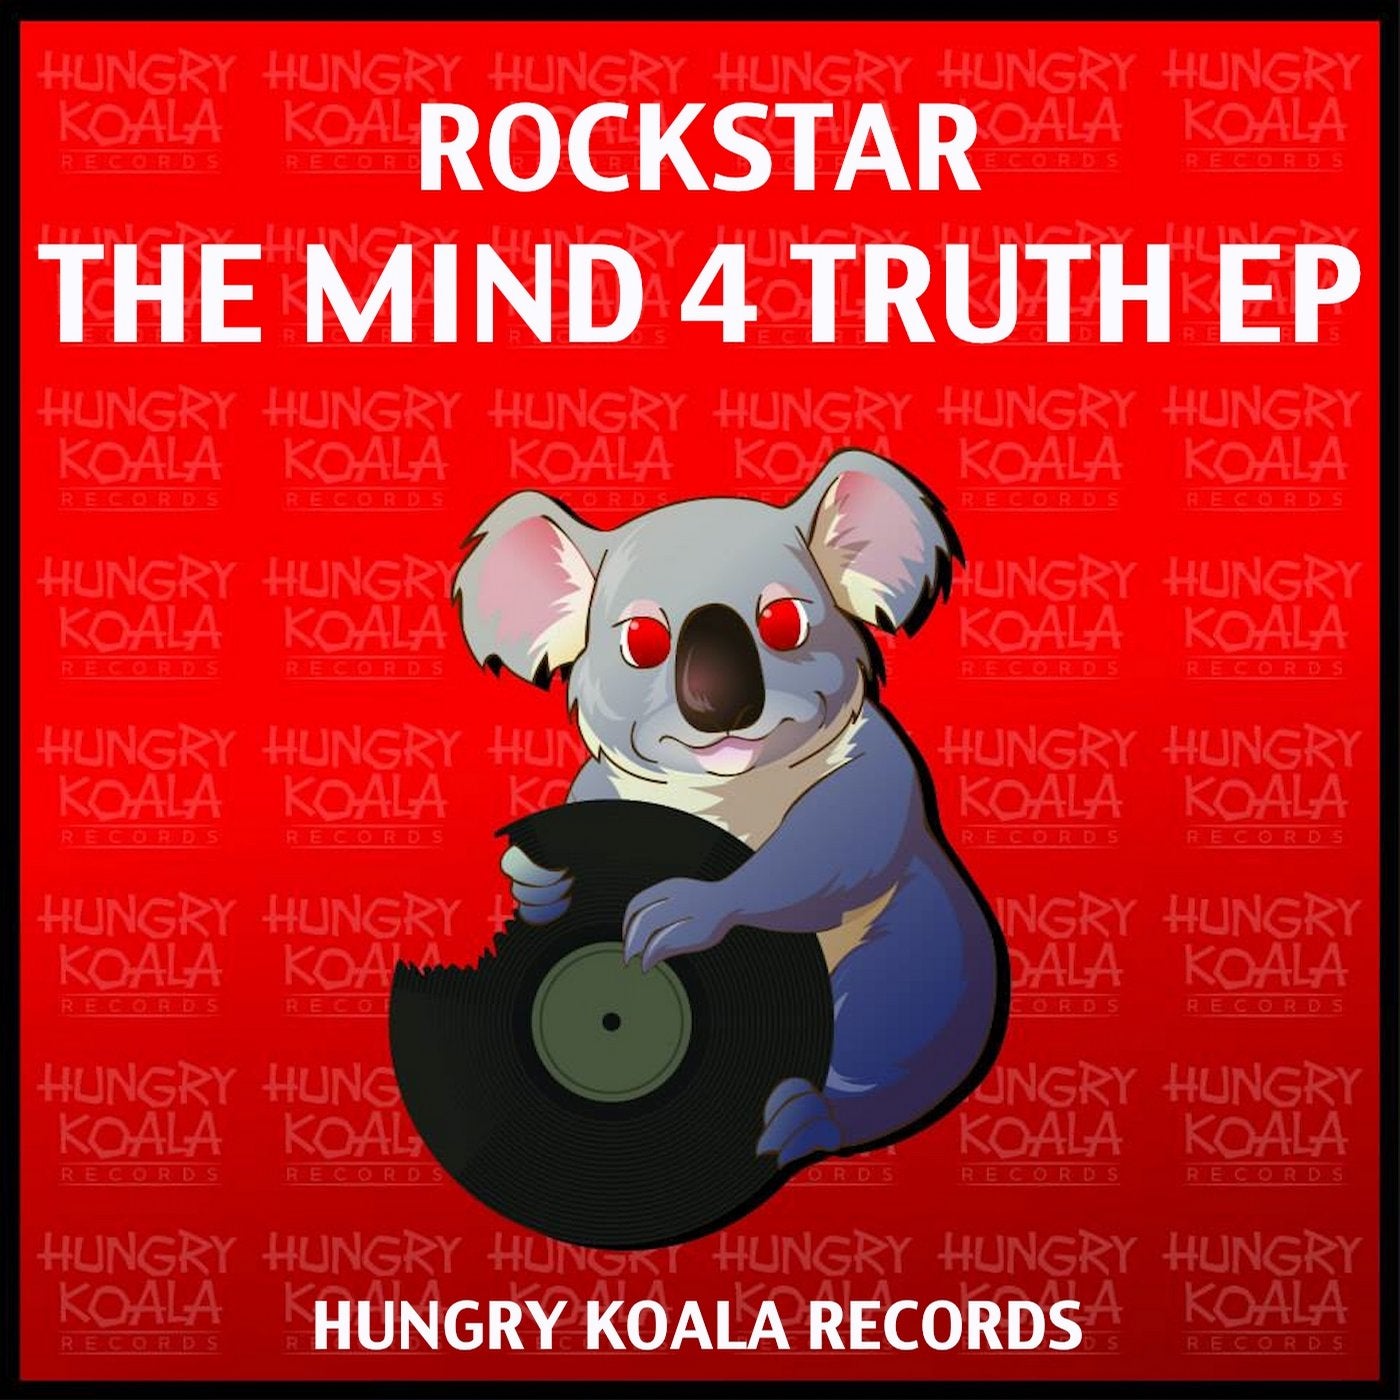 The Mind 4 Truth EP